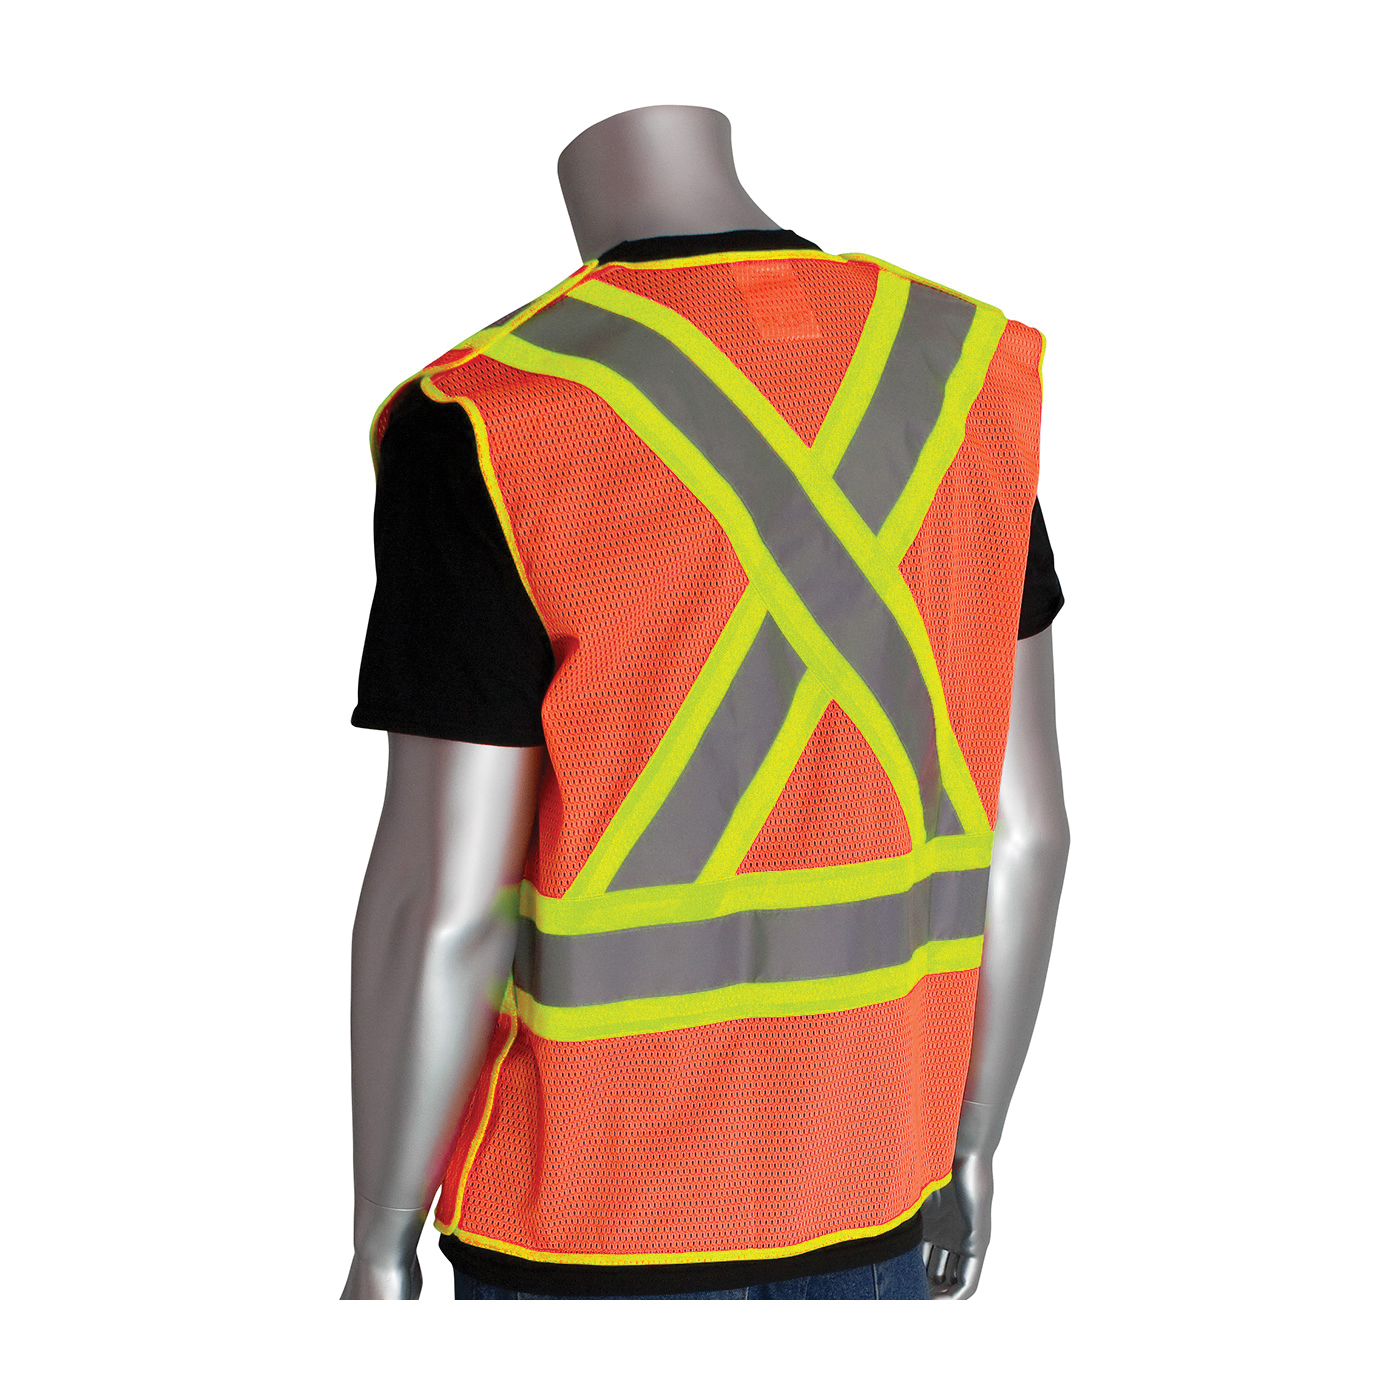 PIP® 302-0211-OR/S 2-Tone X-Back Safety Vest, S, Hi-Viz Orange, Polyester Mesh, Hook and Loop Closure, 5 Pockets, ANSI Class: Class 2, Specifications Met: ANSI 107 Type R, CAN/CSA Z96